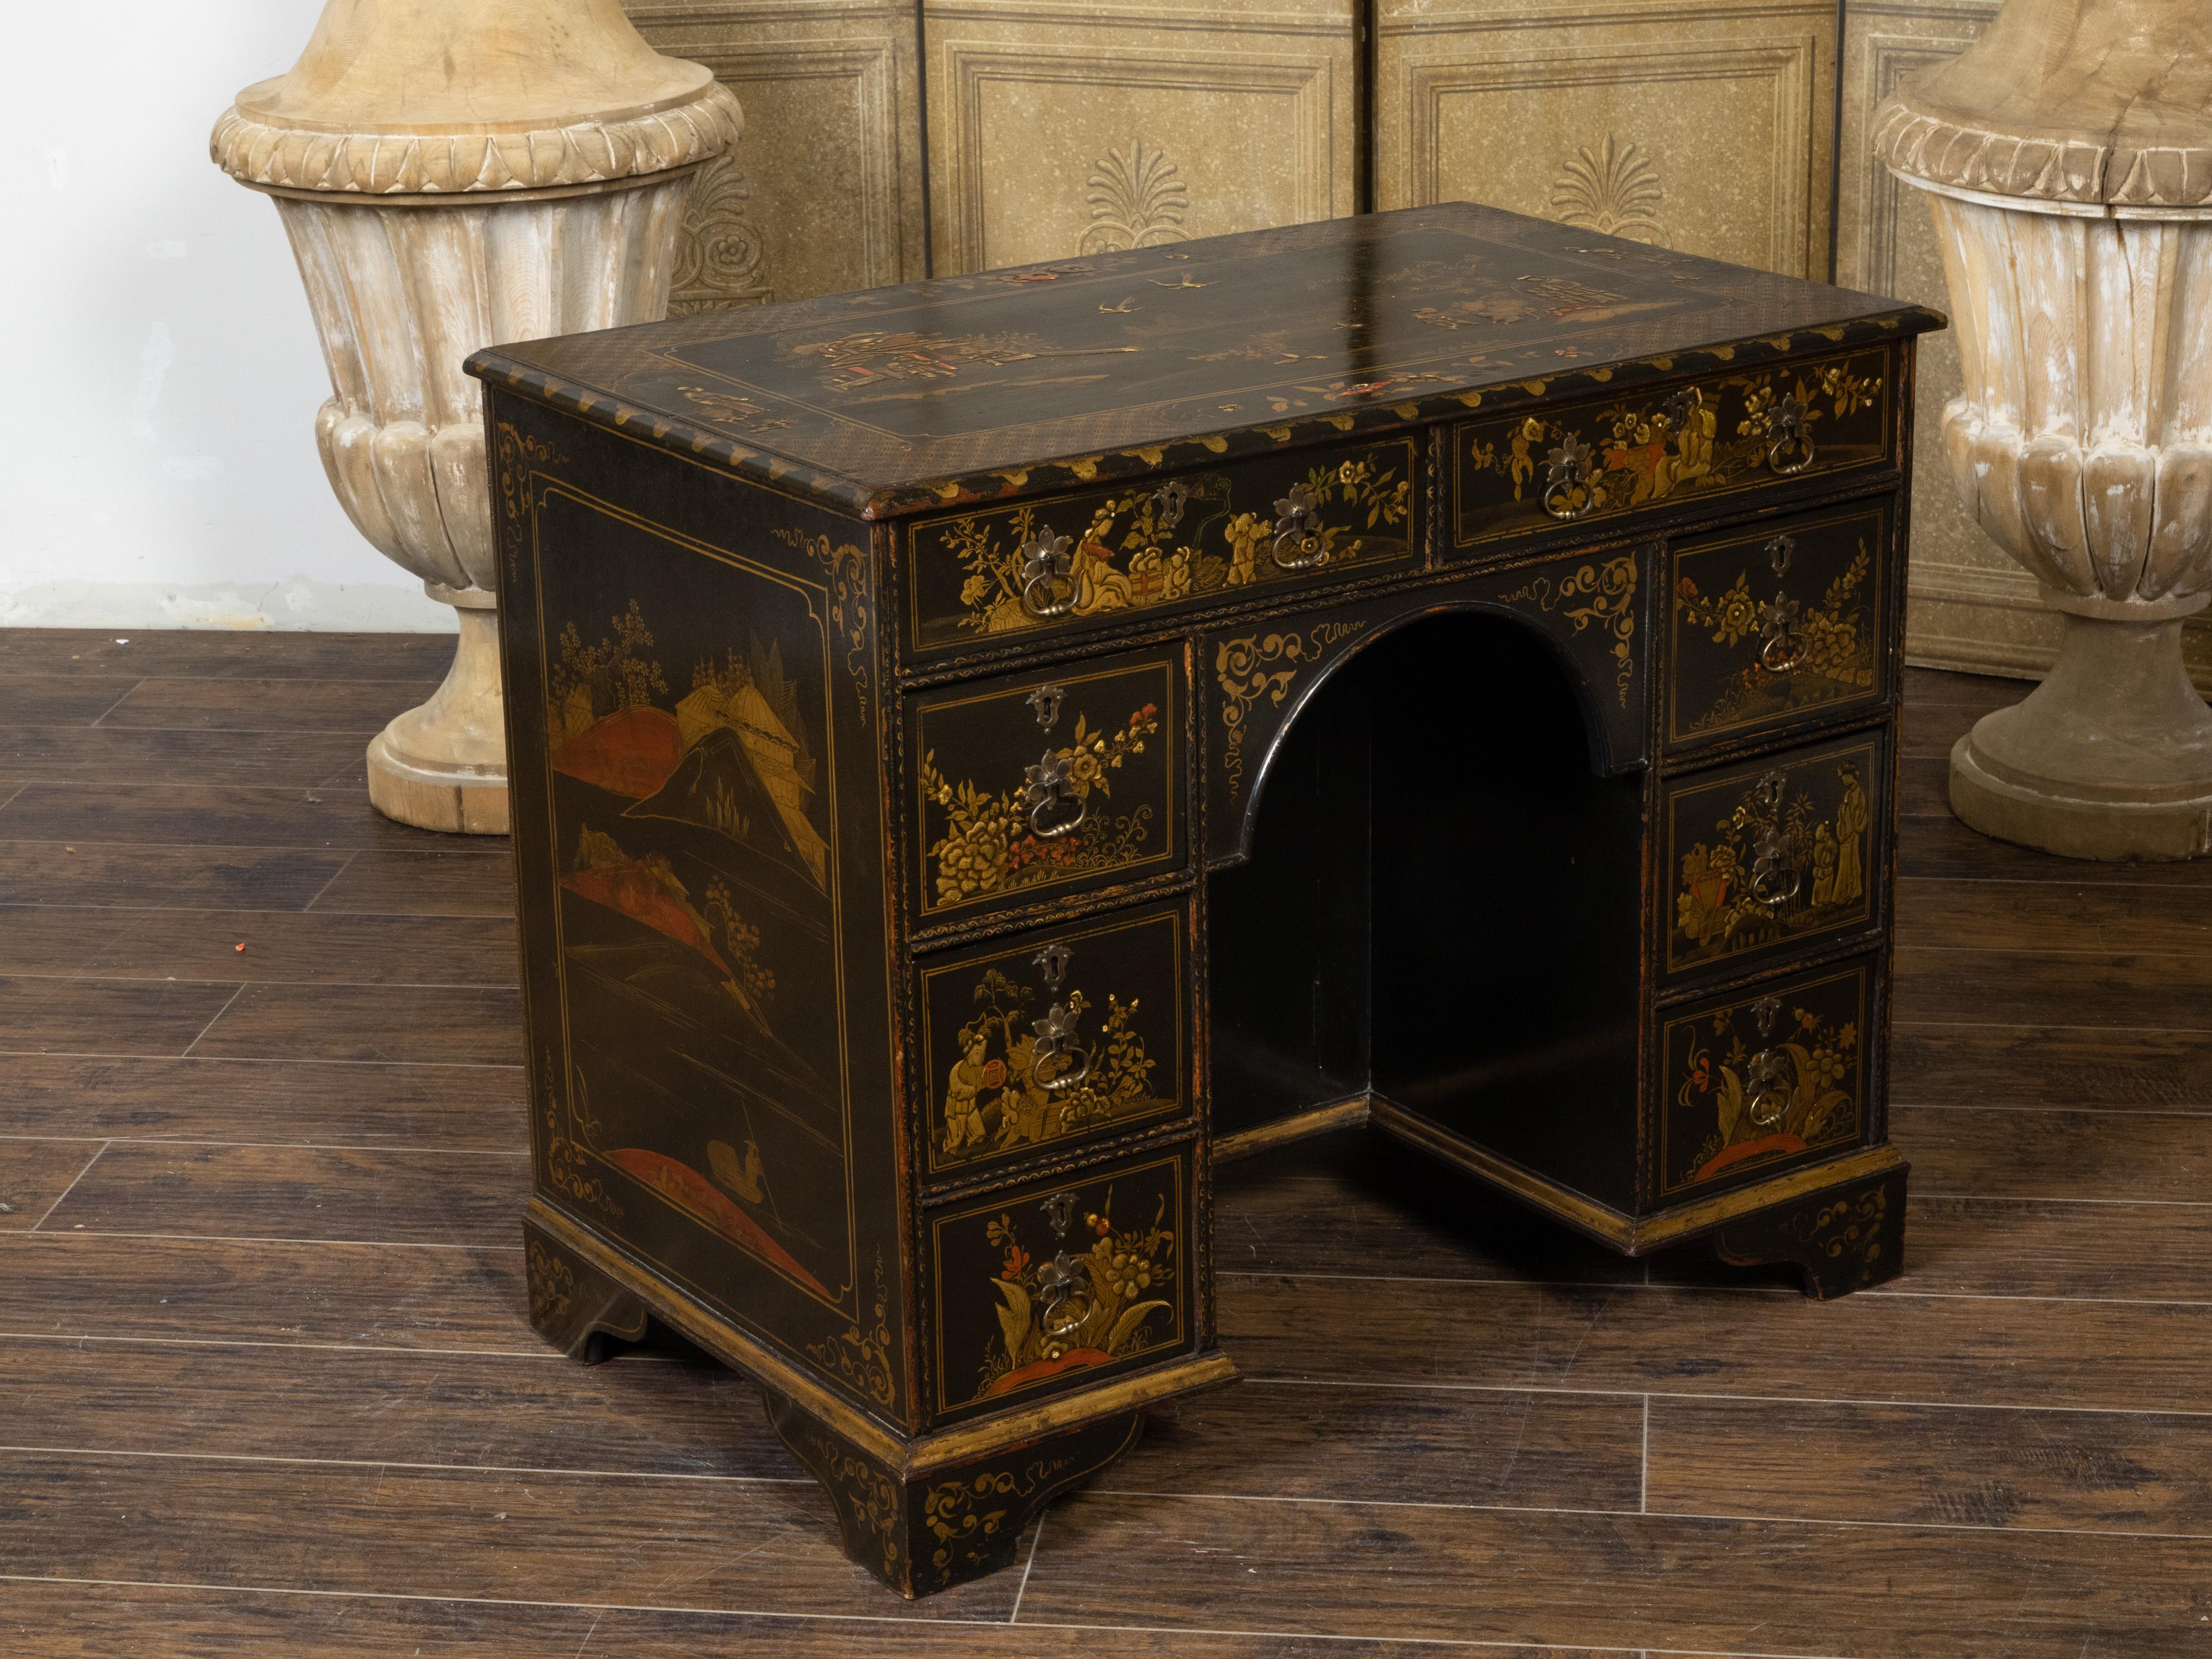 English 19th Century Japanned Desk with Black and Gold Chinoiserie Décor For Sale 4